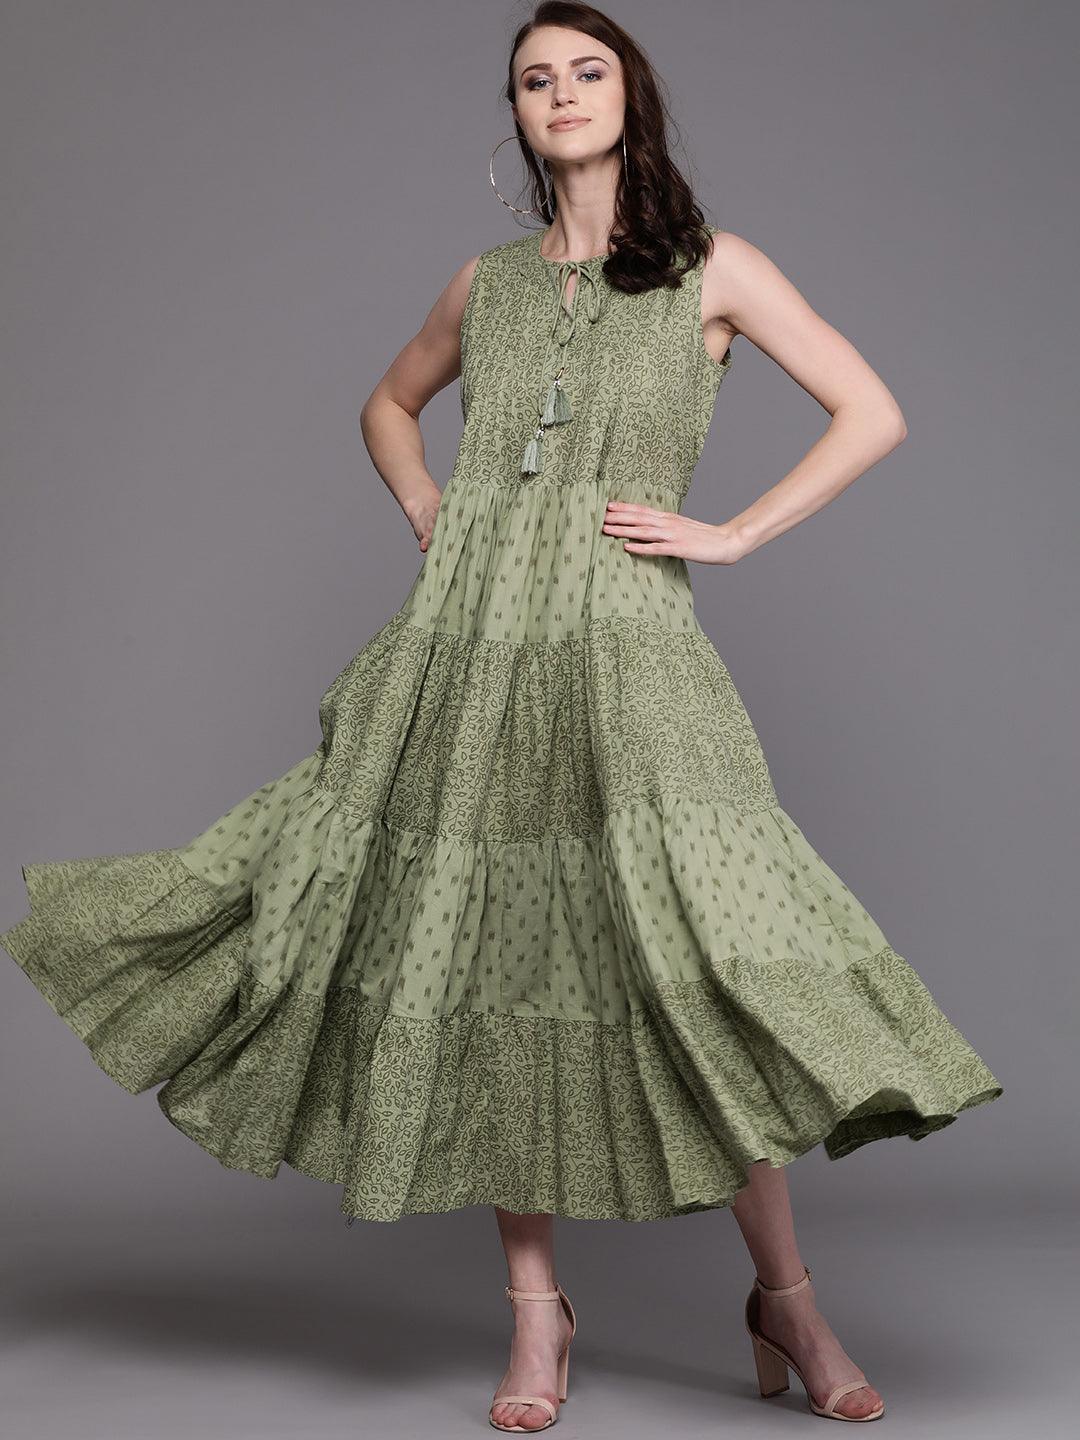 Olive Green Printed Tiered Maxi Dress (Fully Stitched) - Znxclothing